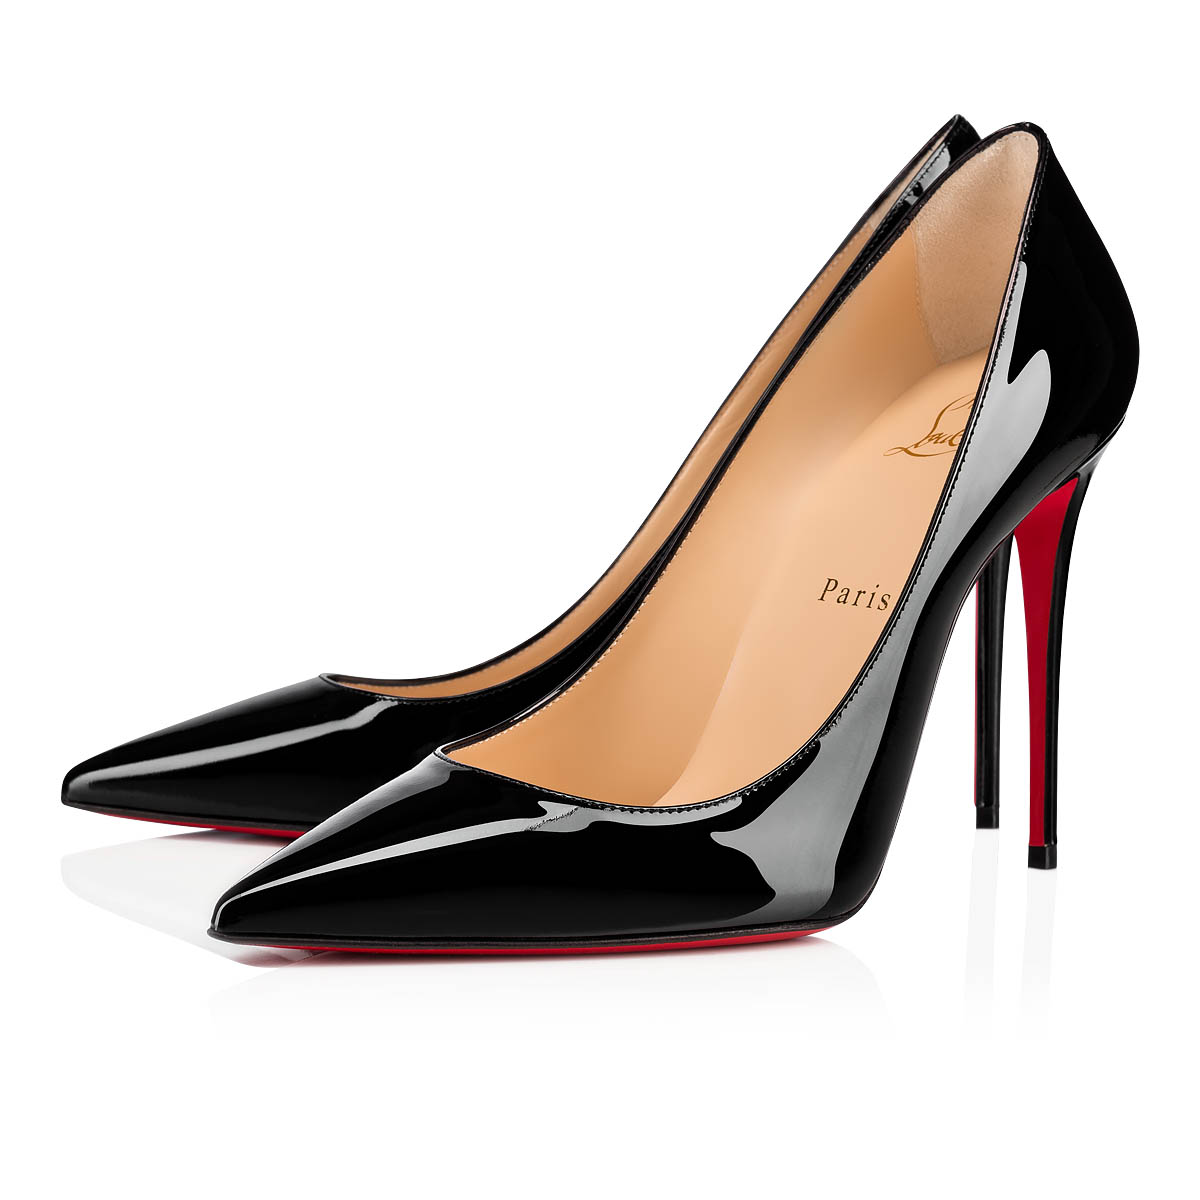 Christian Louboutin - Authenticated So Kate Heel - Patent Leather Black Plain for Women, Very Good Condition